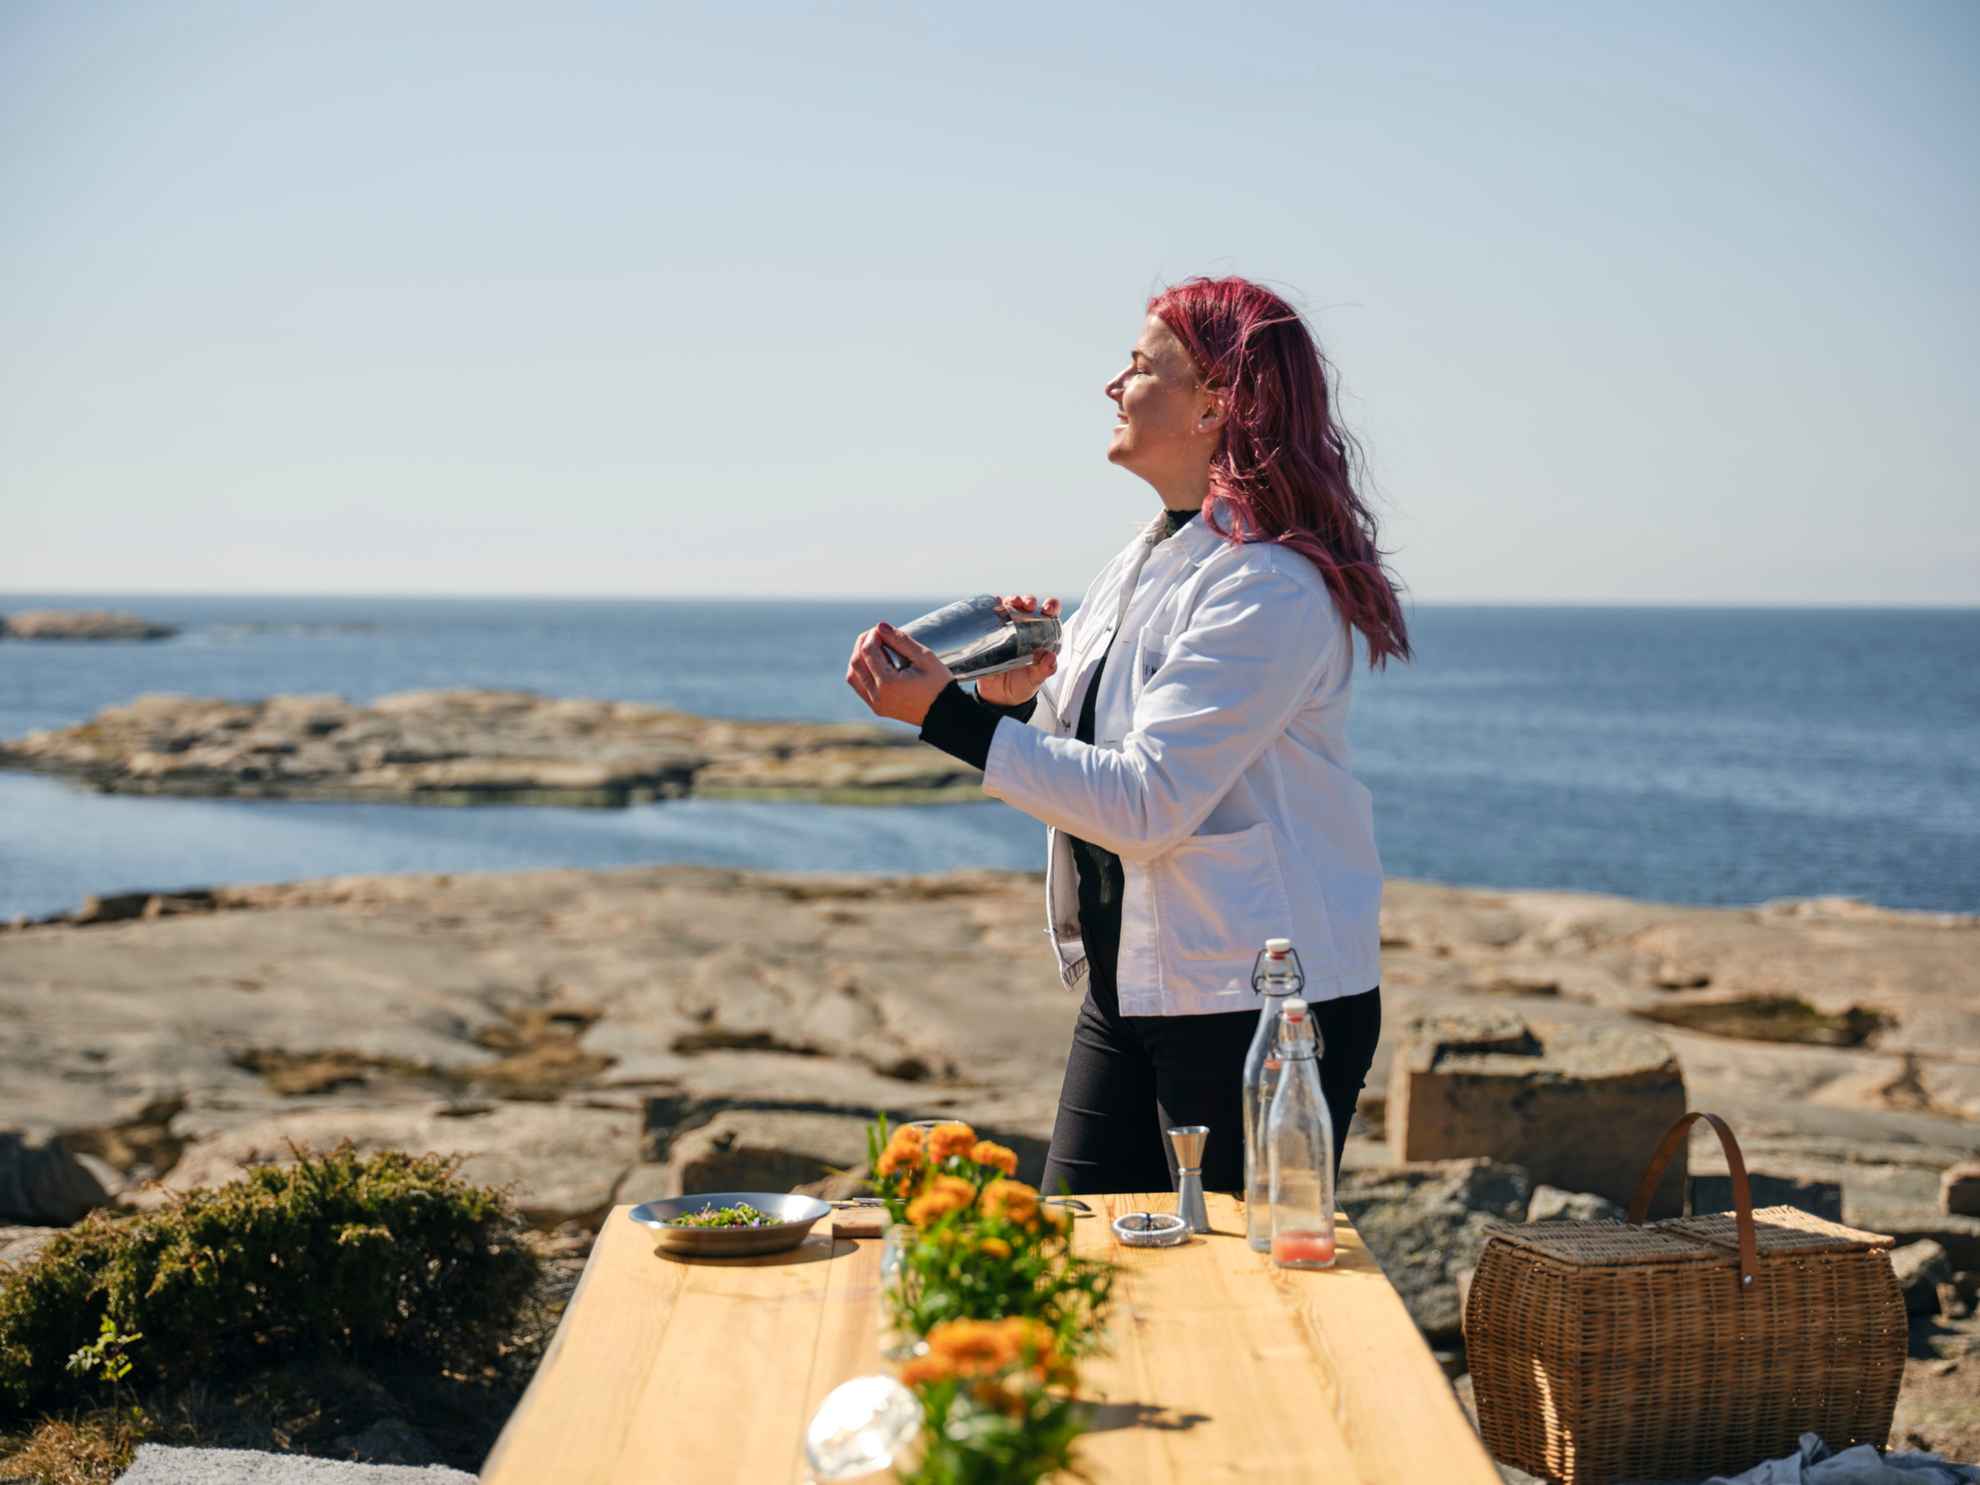 A female bartender is mixing a drink next to a wooden table on the cliffs at the coast. The table is decorated with orange flowers and there are two bottles and a plate on the table.